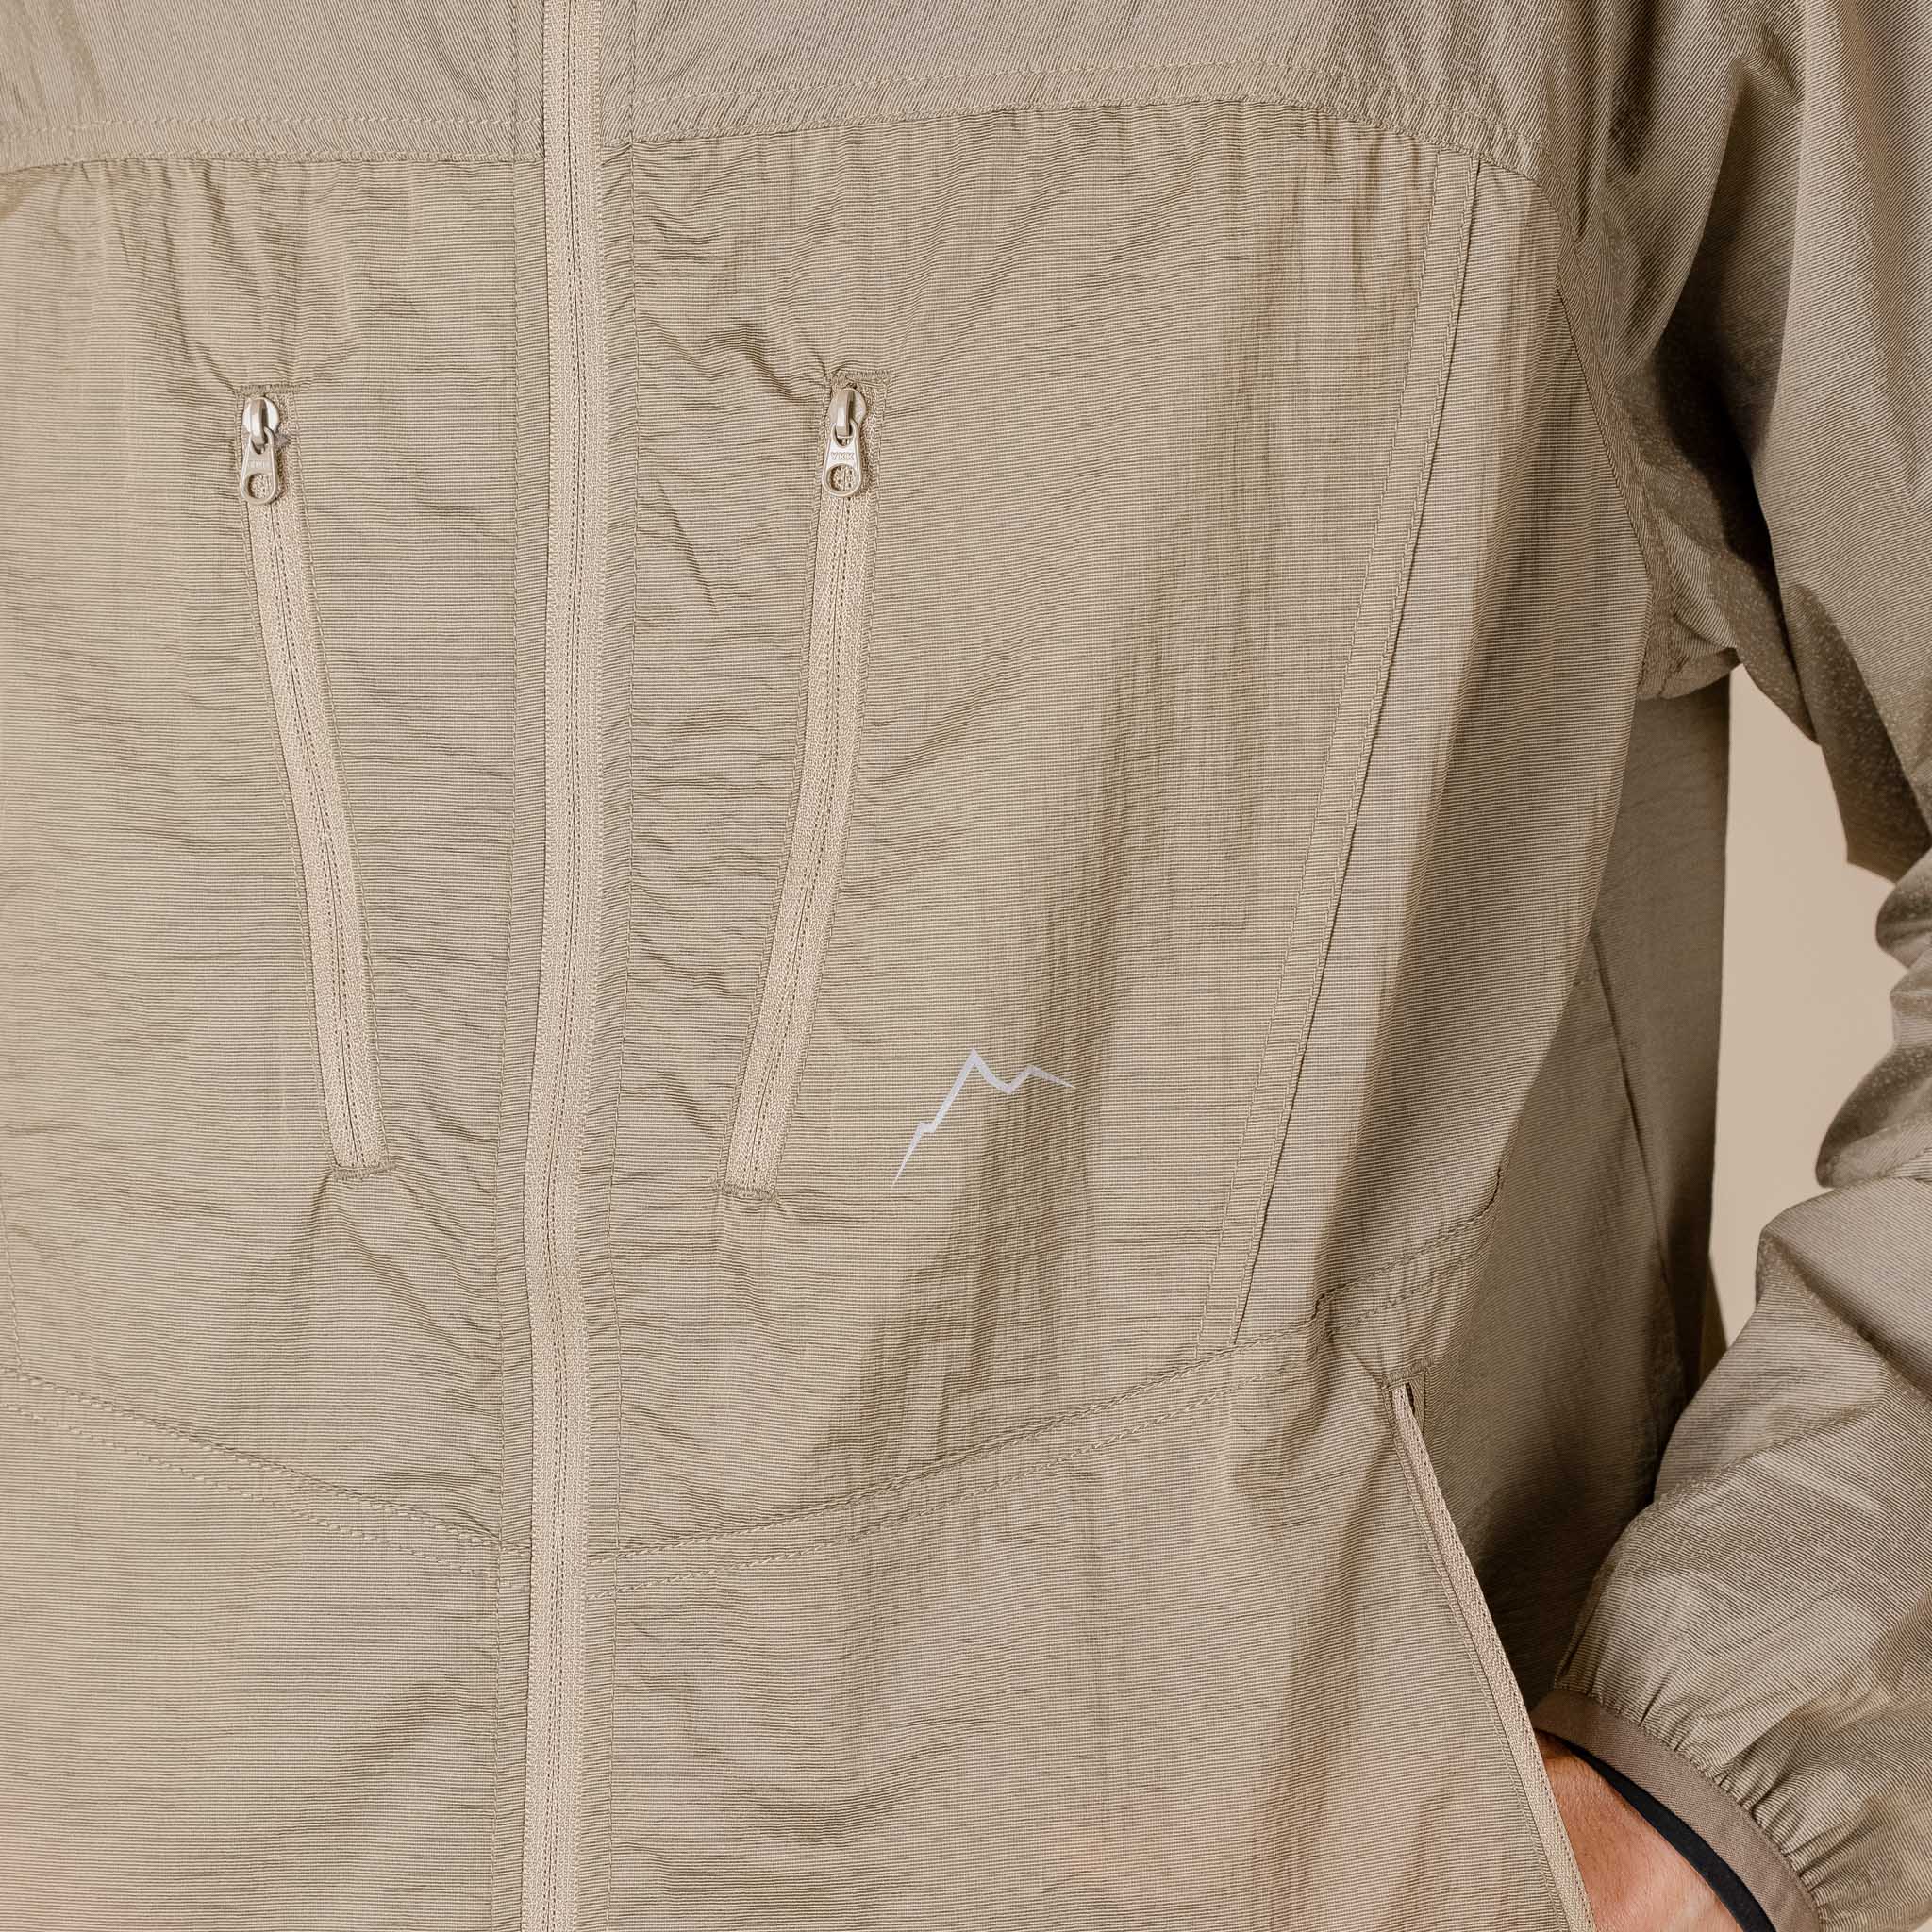 CAYL "Climb As You Love" - Reflective Wind Jacket - Sand Brown